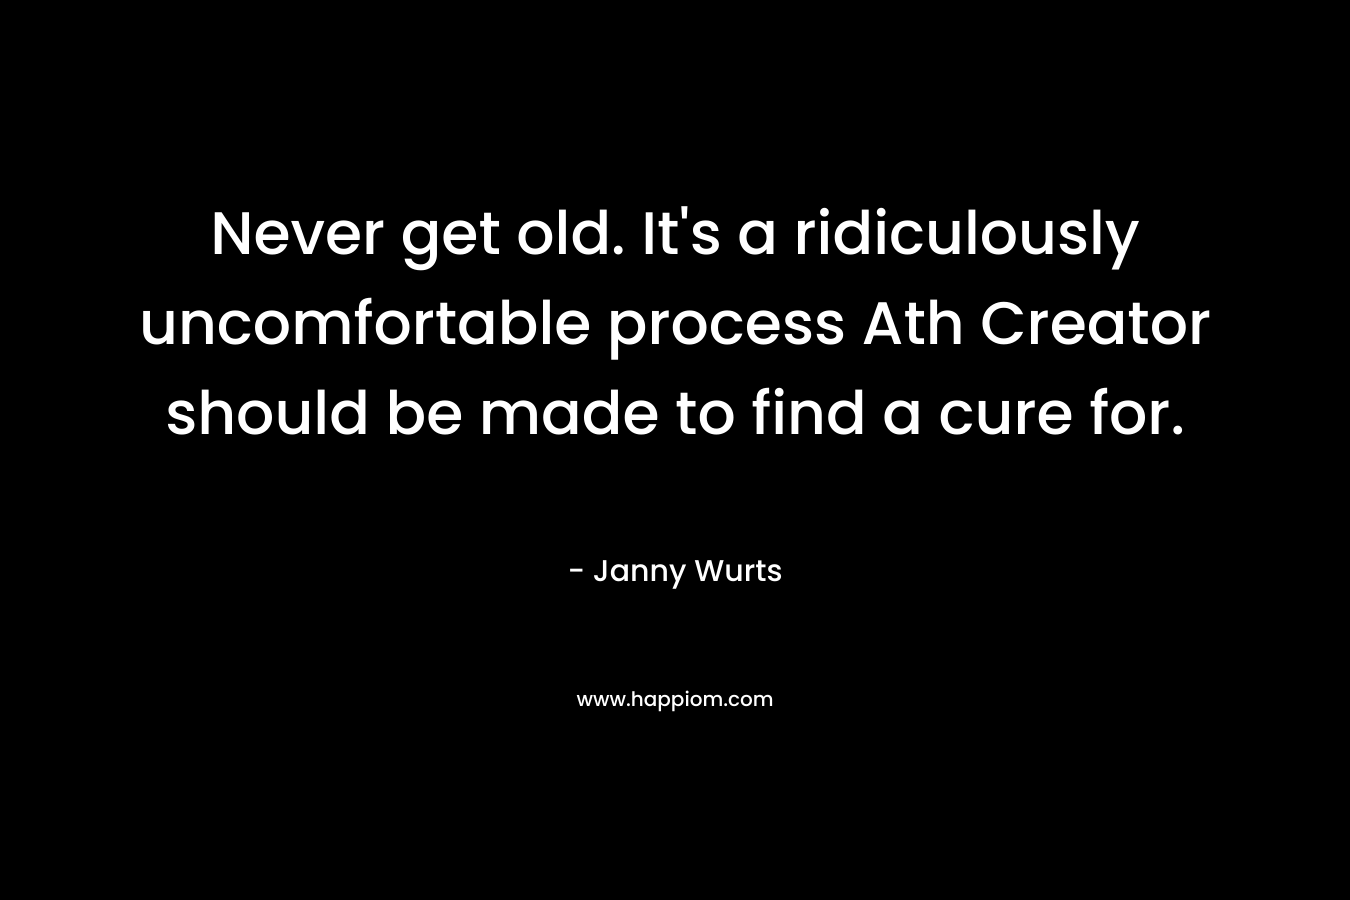 Never get old. It’s a ridiculously uncomfortable process Ath Creator should be made to find a cure for. – Janny Wurts